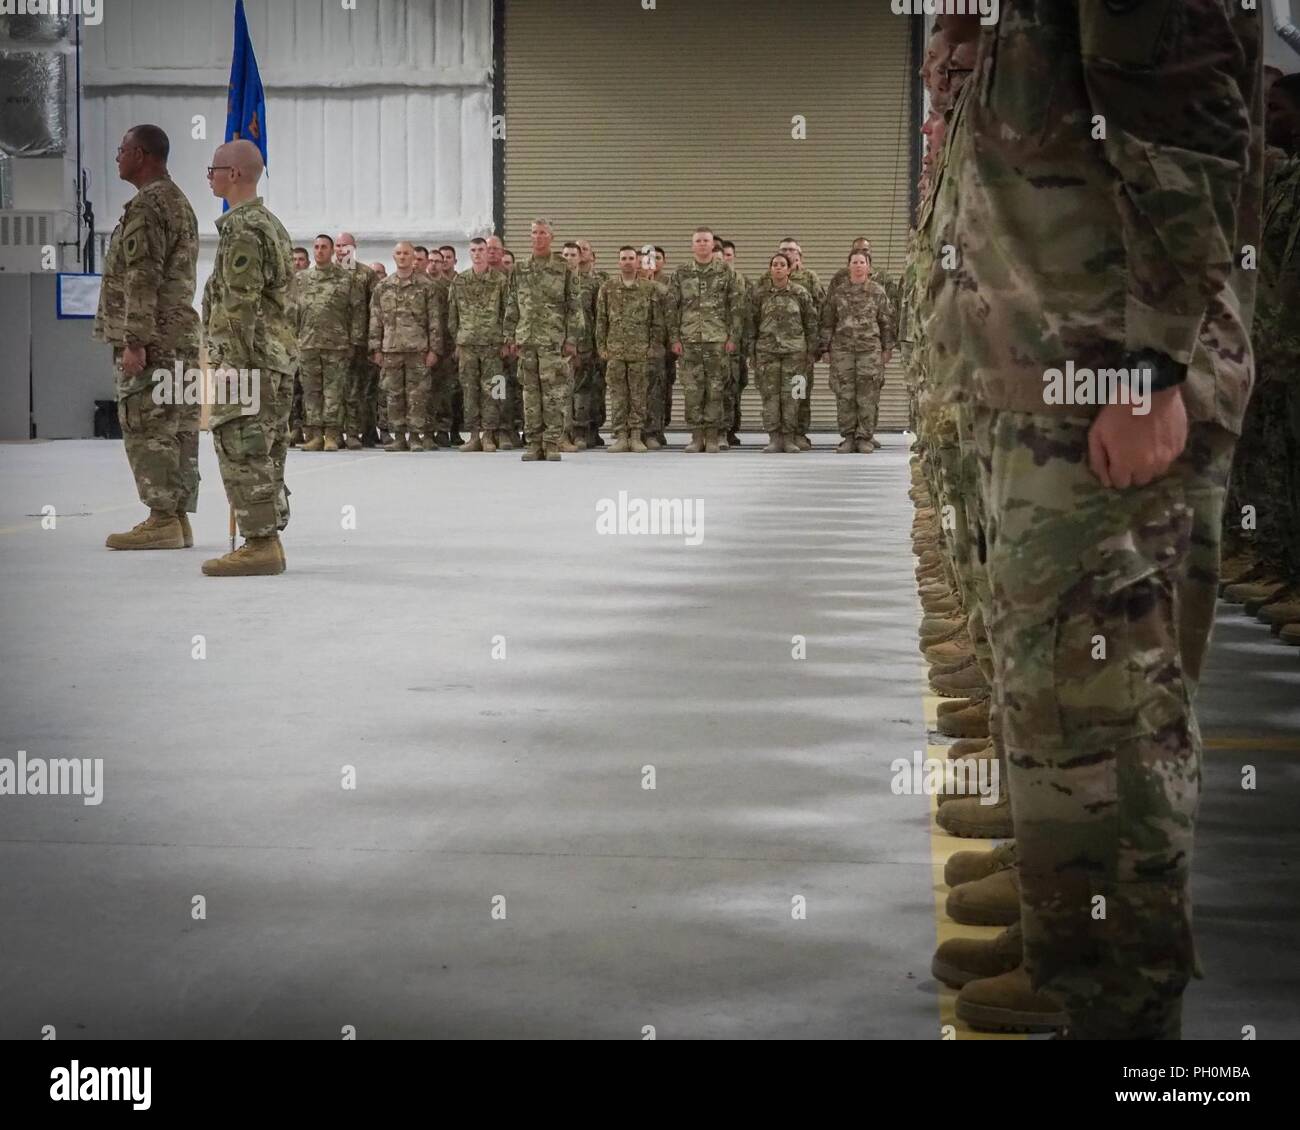 U.S. Army National Guard Soldiers from B. Co., 935th Aviation Support Battalion, 35th Combat Aviation Brigade (CAB), based in Kankakee, Ill., stand at attention during the shoulder-sleeve insignia change ceremony at North Fort Hood, Texas, June 15, 2018.  Bravo company unifies in preparation for a deployment with the 35th CAB. Stock Photo